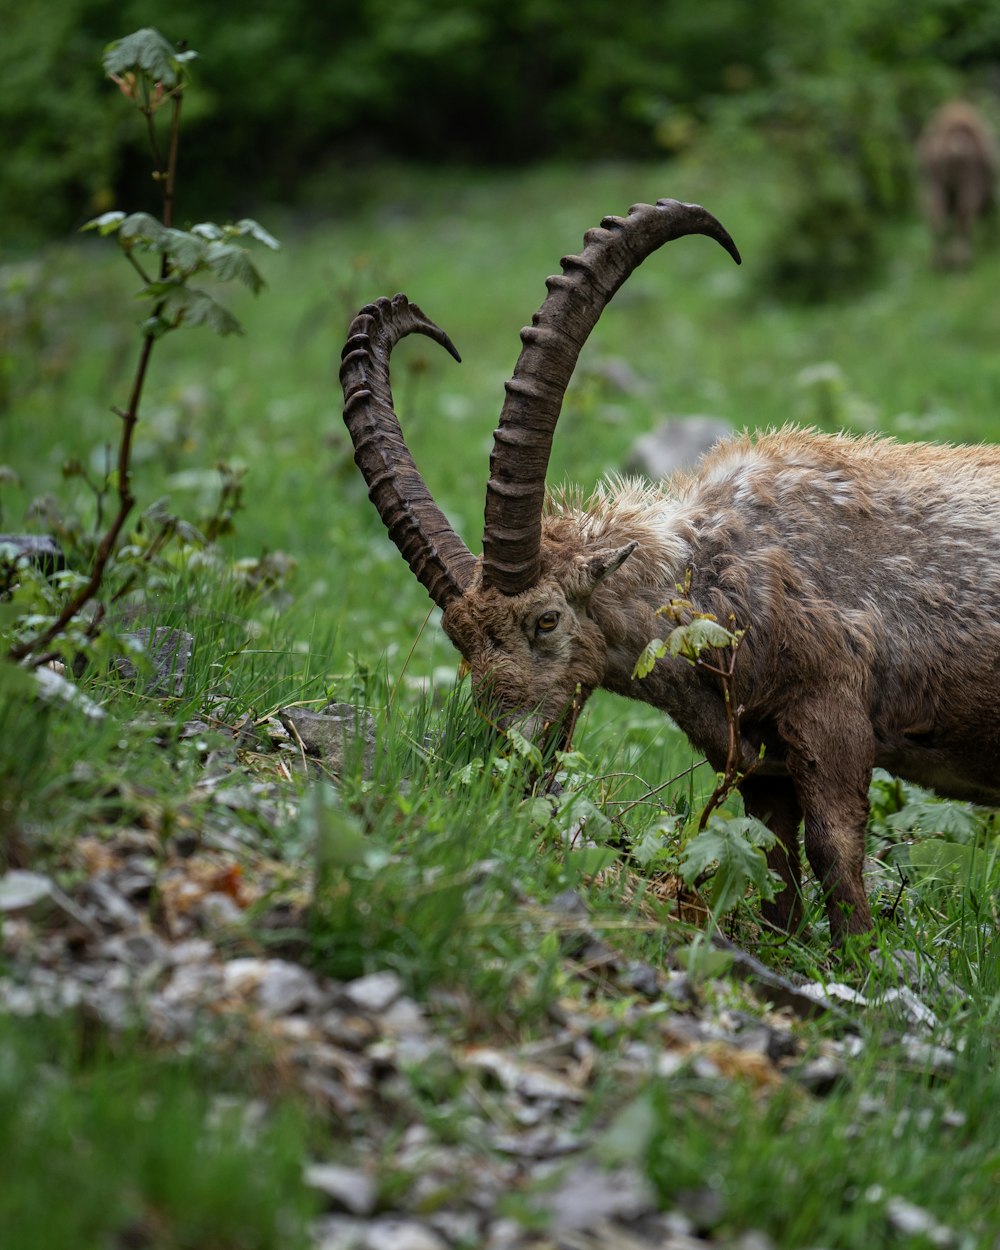 a goat with long horns grazing in a field